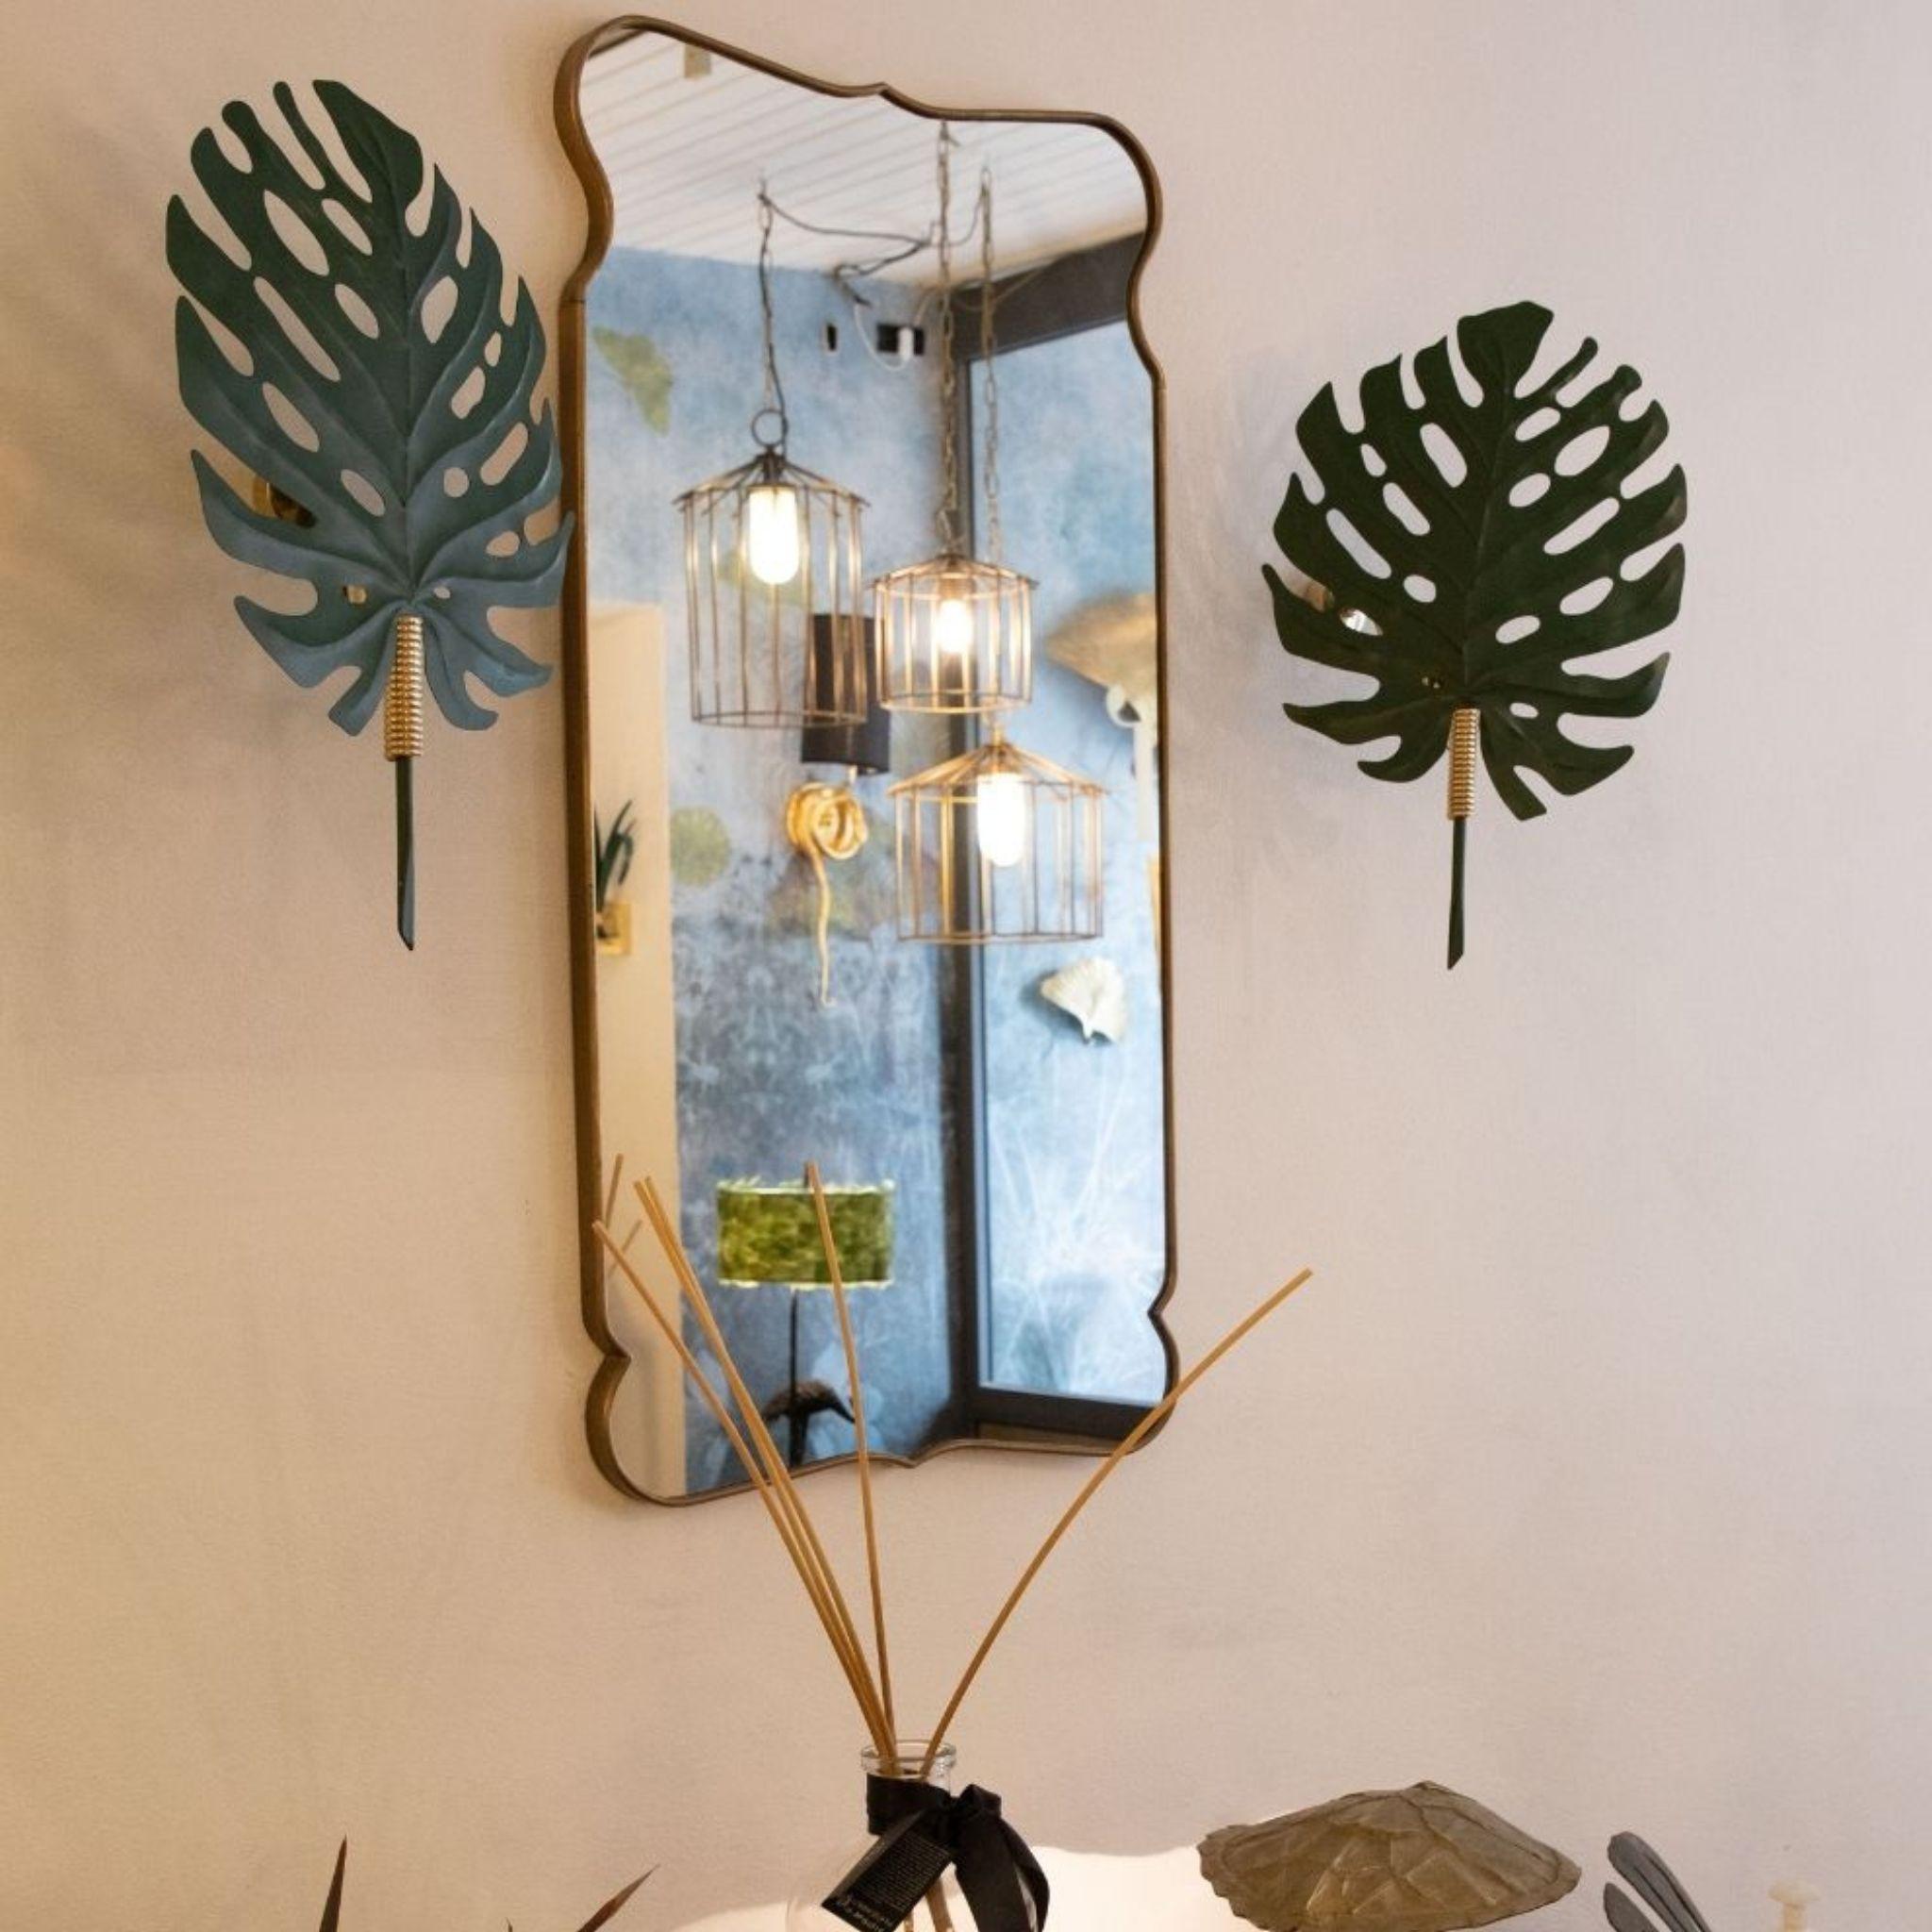 Transform your space with the enchanting Hortus Monstera Leaf Wall Light. Crafted from iron, this exquisite wall light features intricate laser-cut details and meticulous manual decorations, showcasing the beauty of the monstera leaf. With its